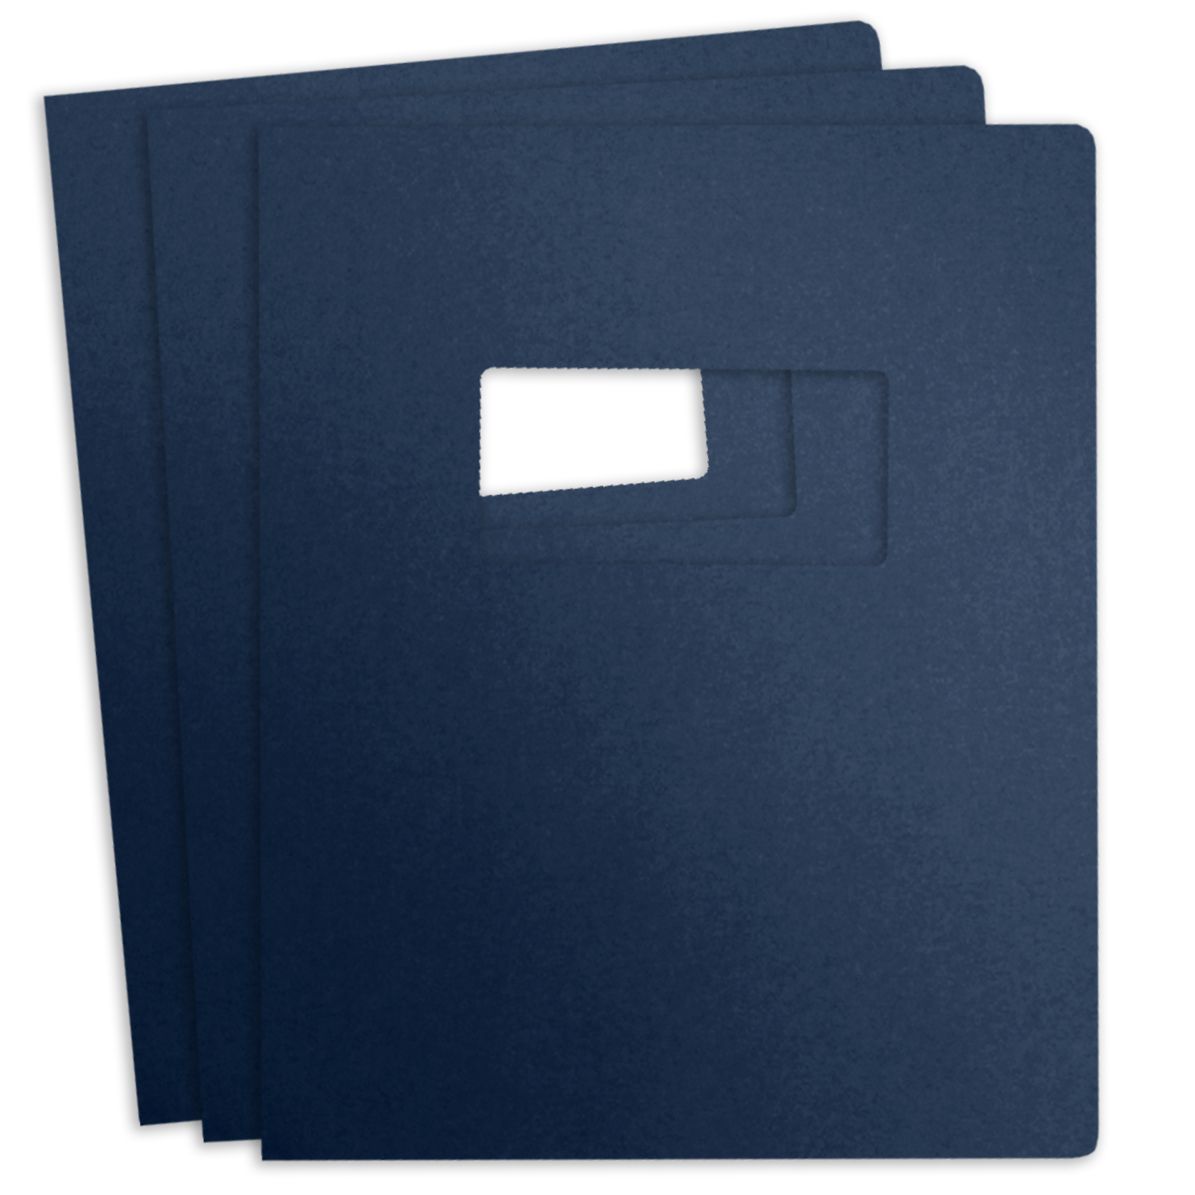 204 Linen Cover [w/ Window, Round Corner, Navy, 19-hole Punch, 8-3/4" X 11-1/4"] 100 /Pack